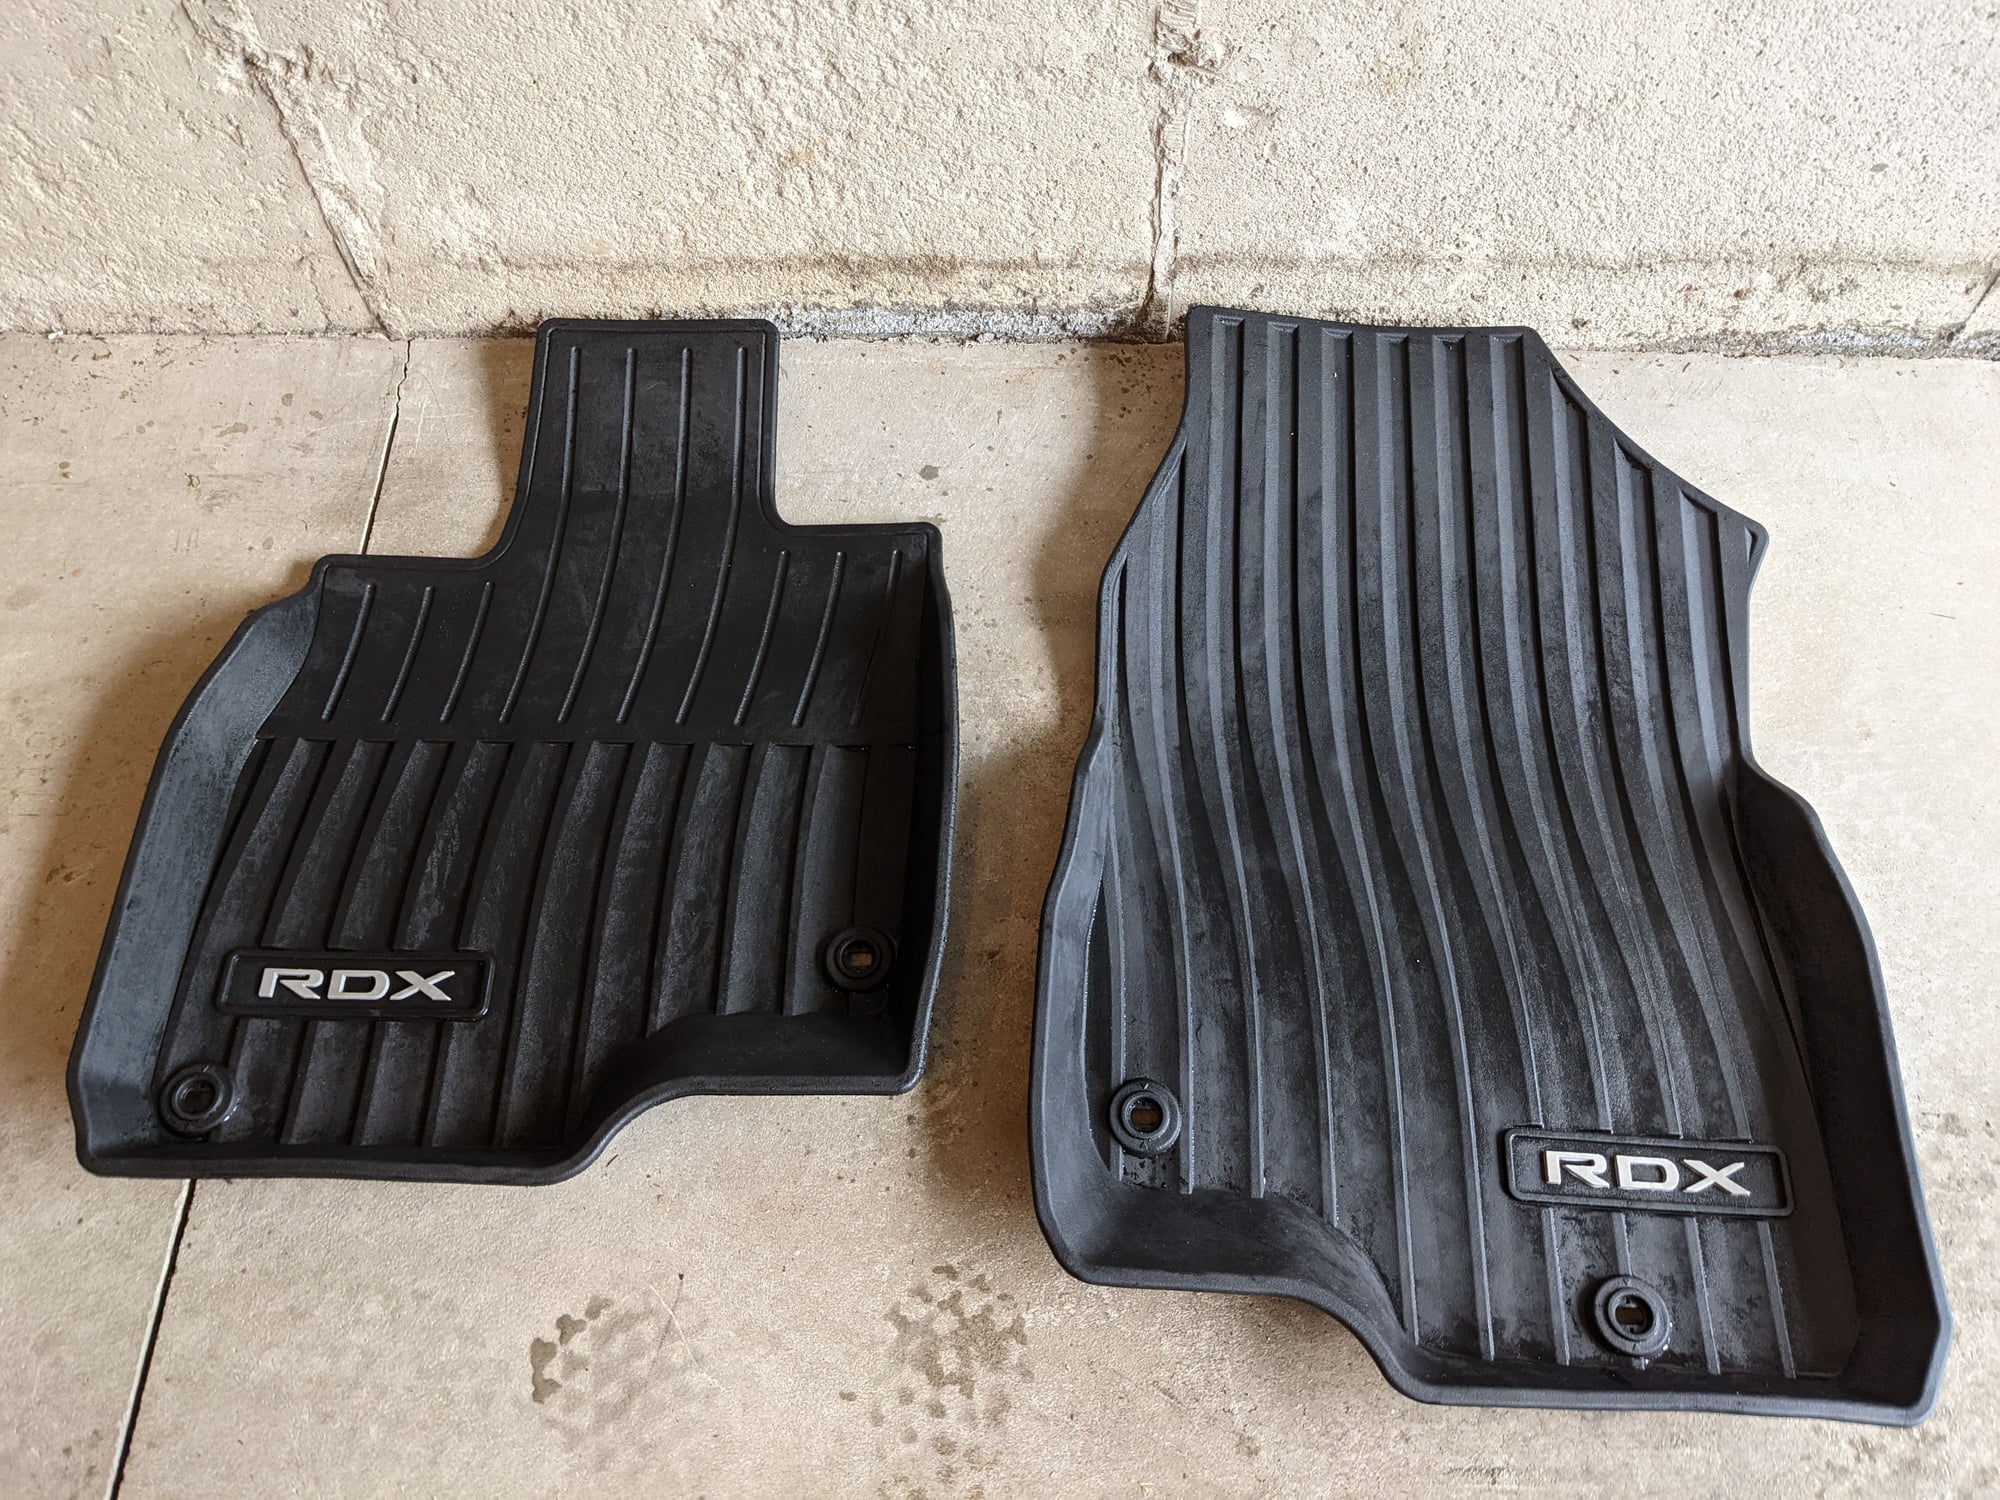 Interior/Upholstery - FS: 2019 - 2021 Acura RDX All-season floor and cargo mats (OEM) - Used - 2019 to 2021 Acura RDX - Kitchener, ON N2R0A7, Canada